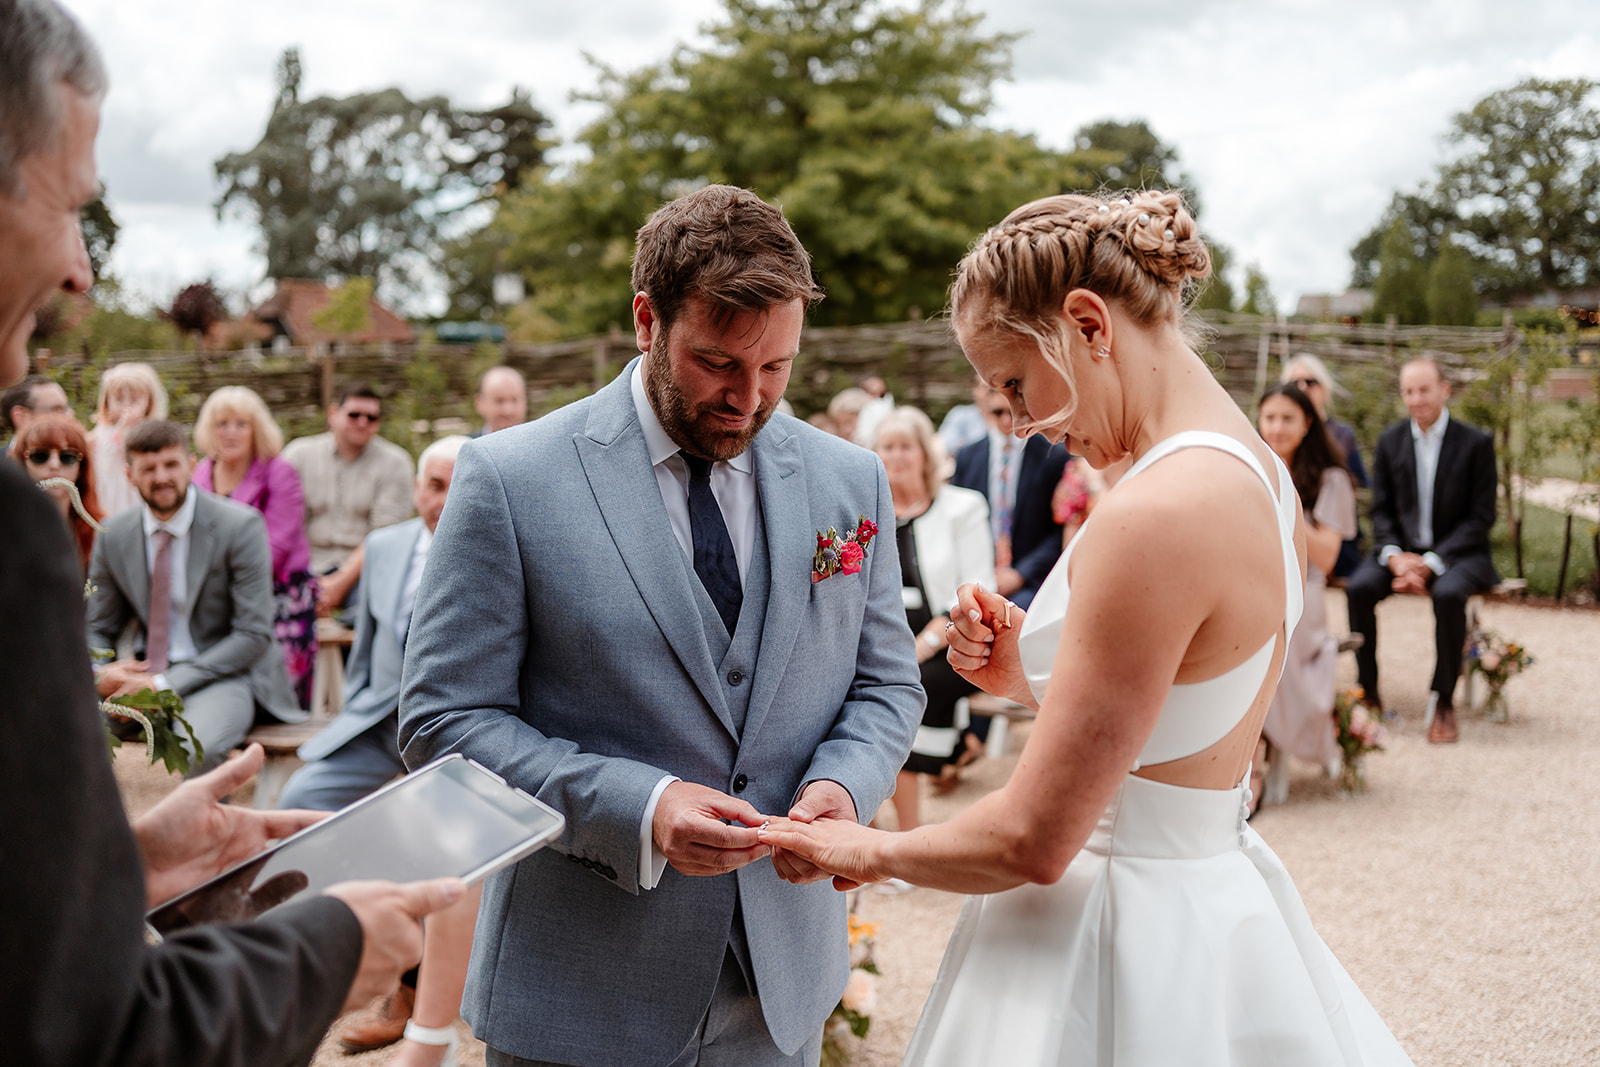 Groom puts the wedding ring on his bride at a summer wedding at Silchester Farm